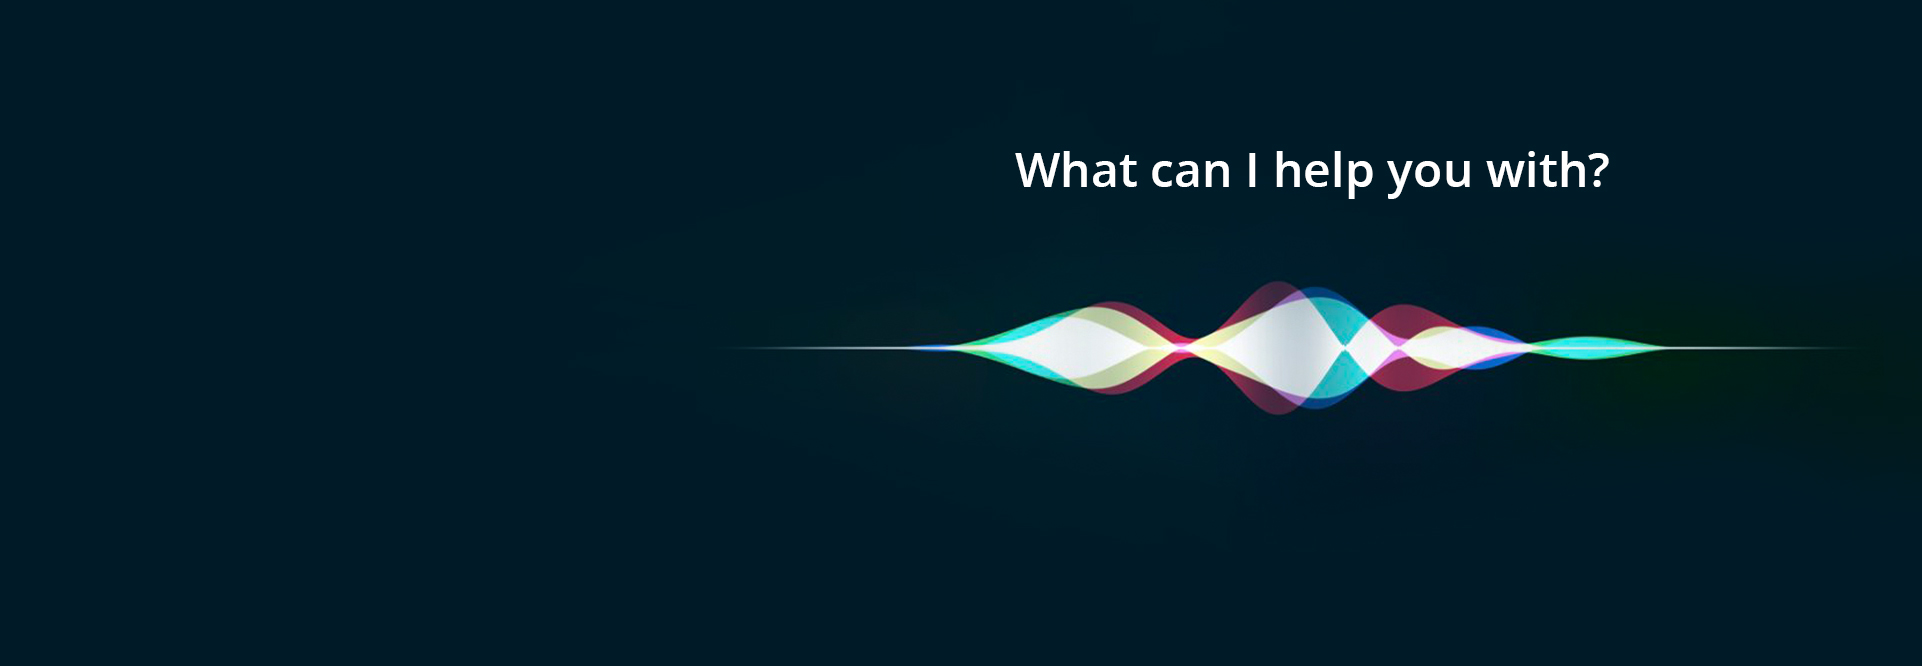 Top 5 Things Apple's Siri Can Do For You